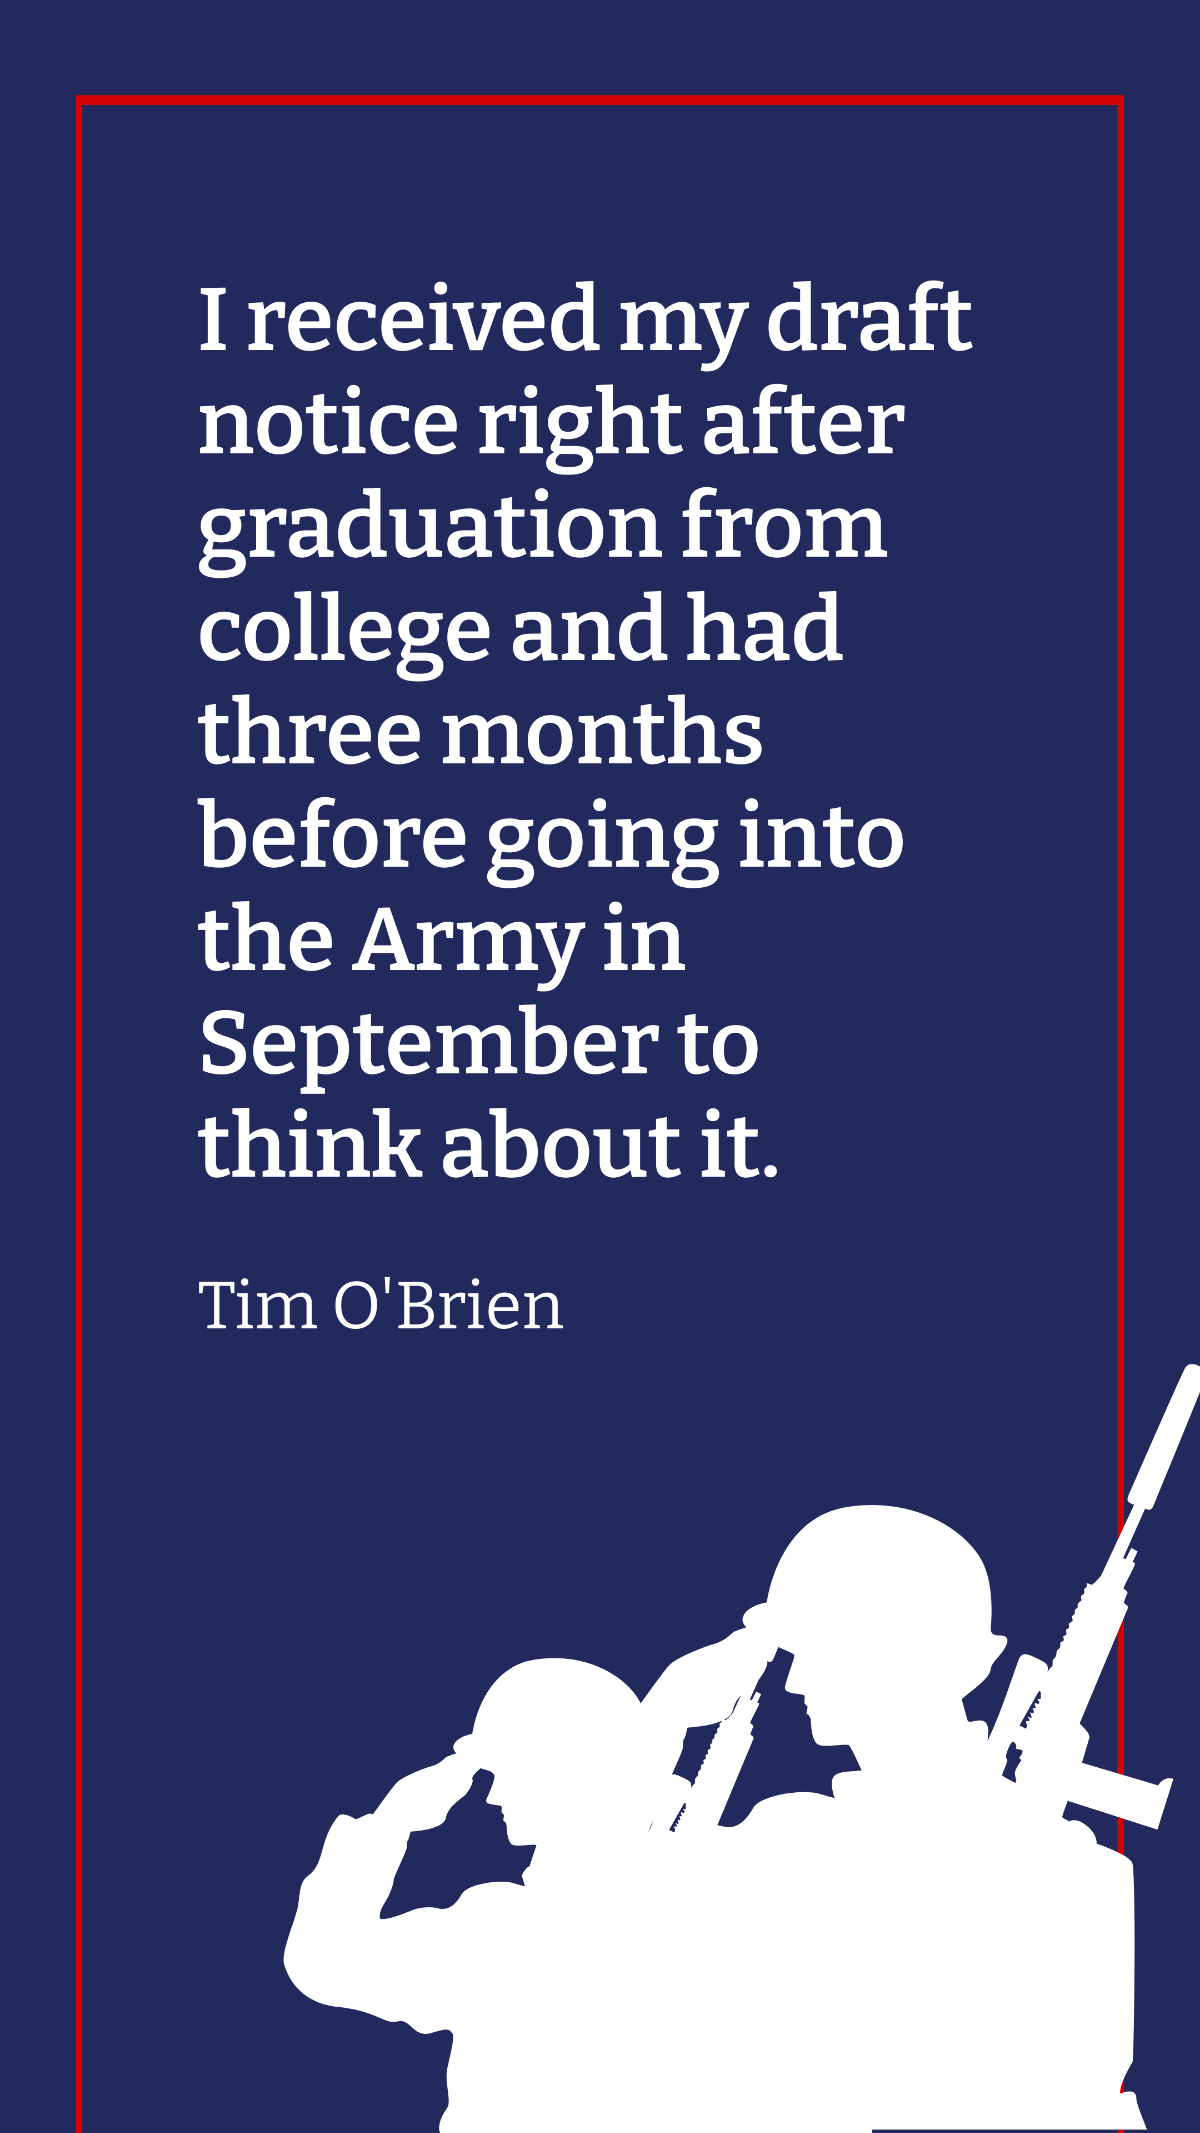 Free Tim O'Brien - I received my draft notice right after graduation from college and had three months before going into the Army in September to think about it. Template